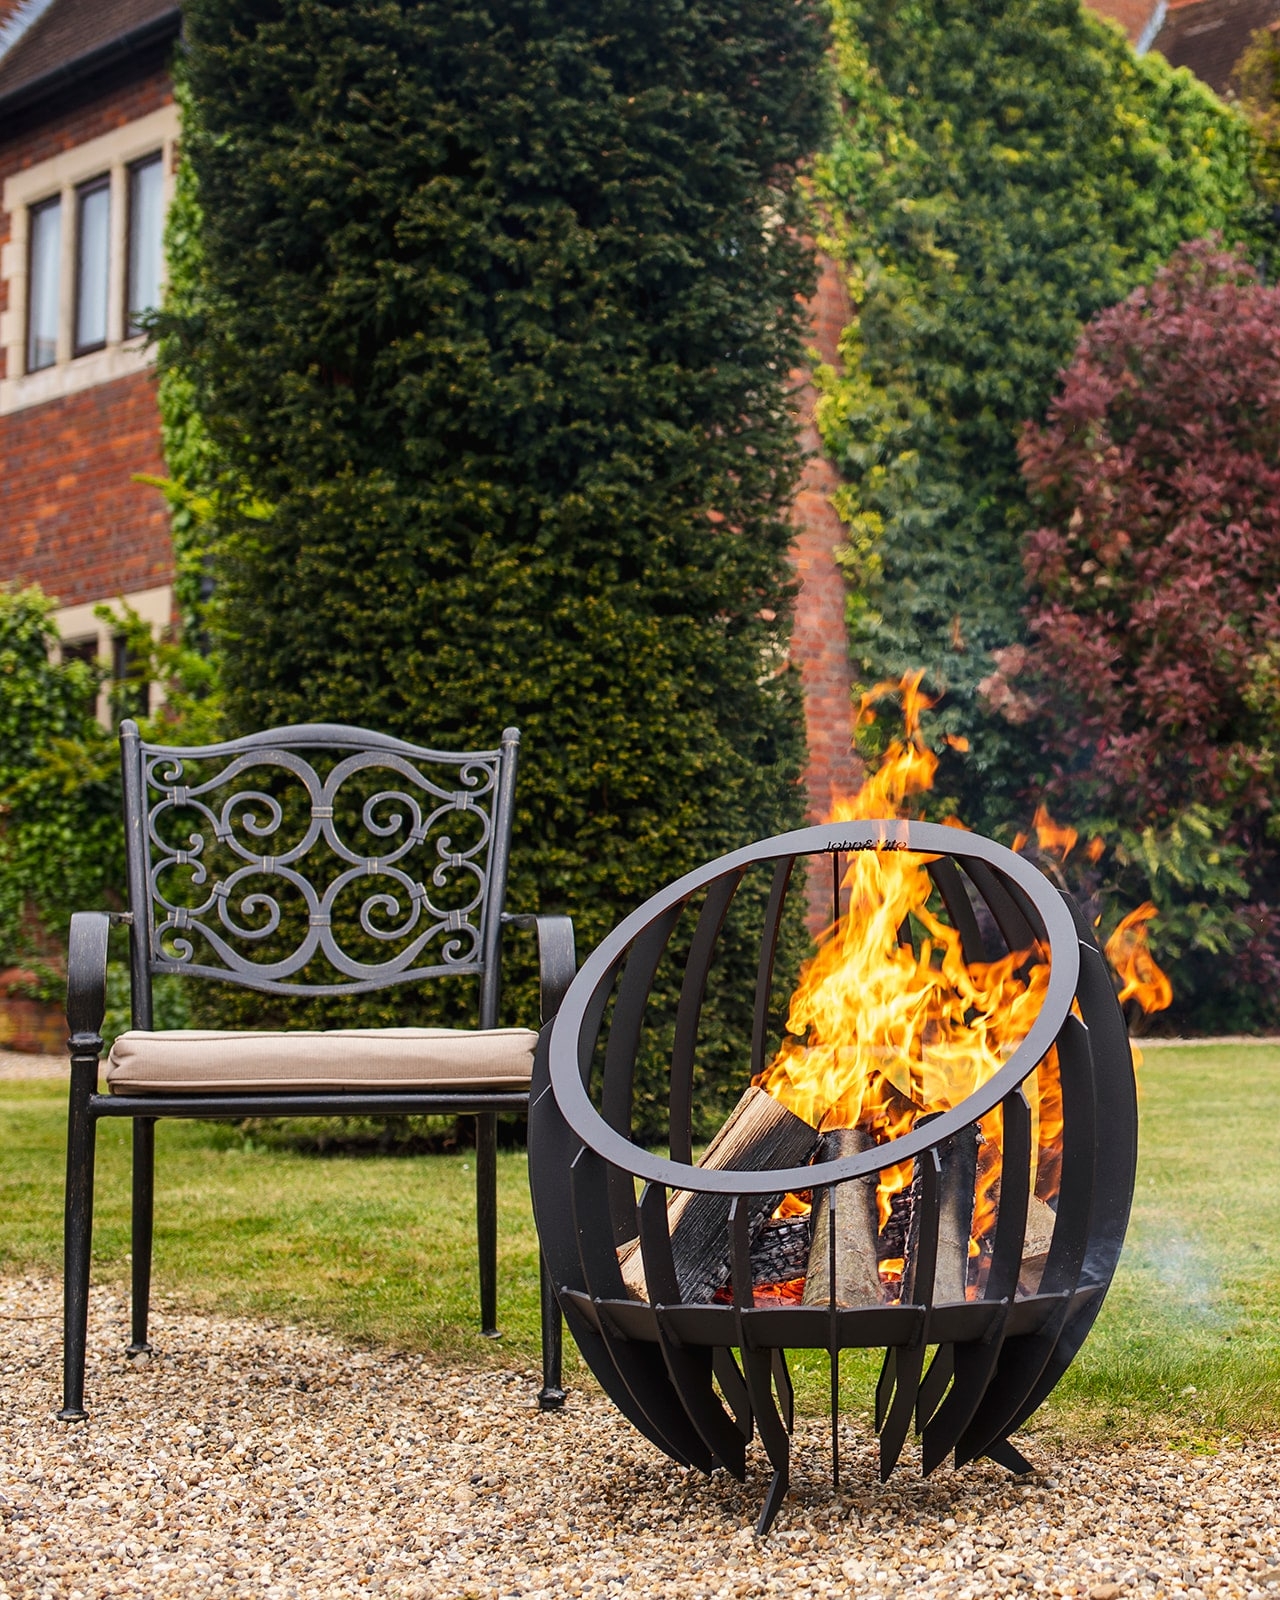 John + Vito Outdoor Firepit – The Egg Fire Pit – Maison Flair